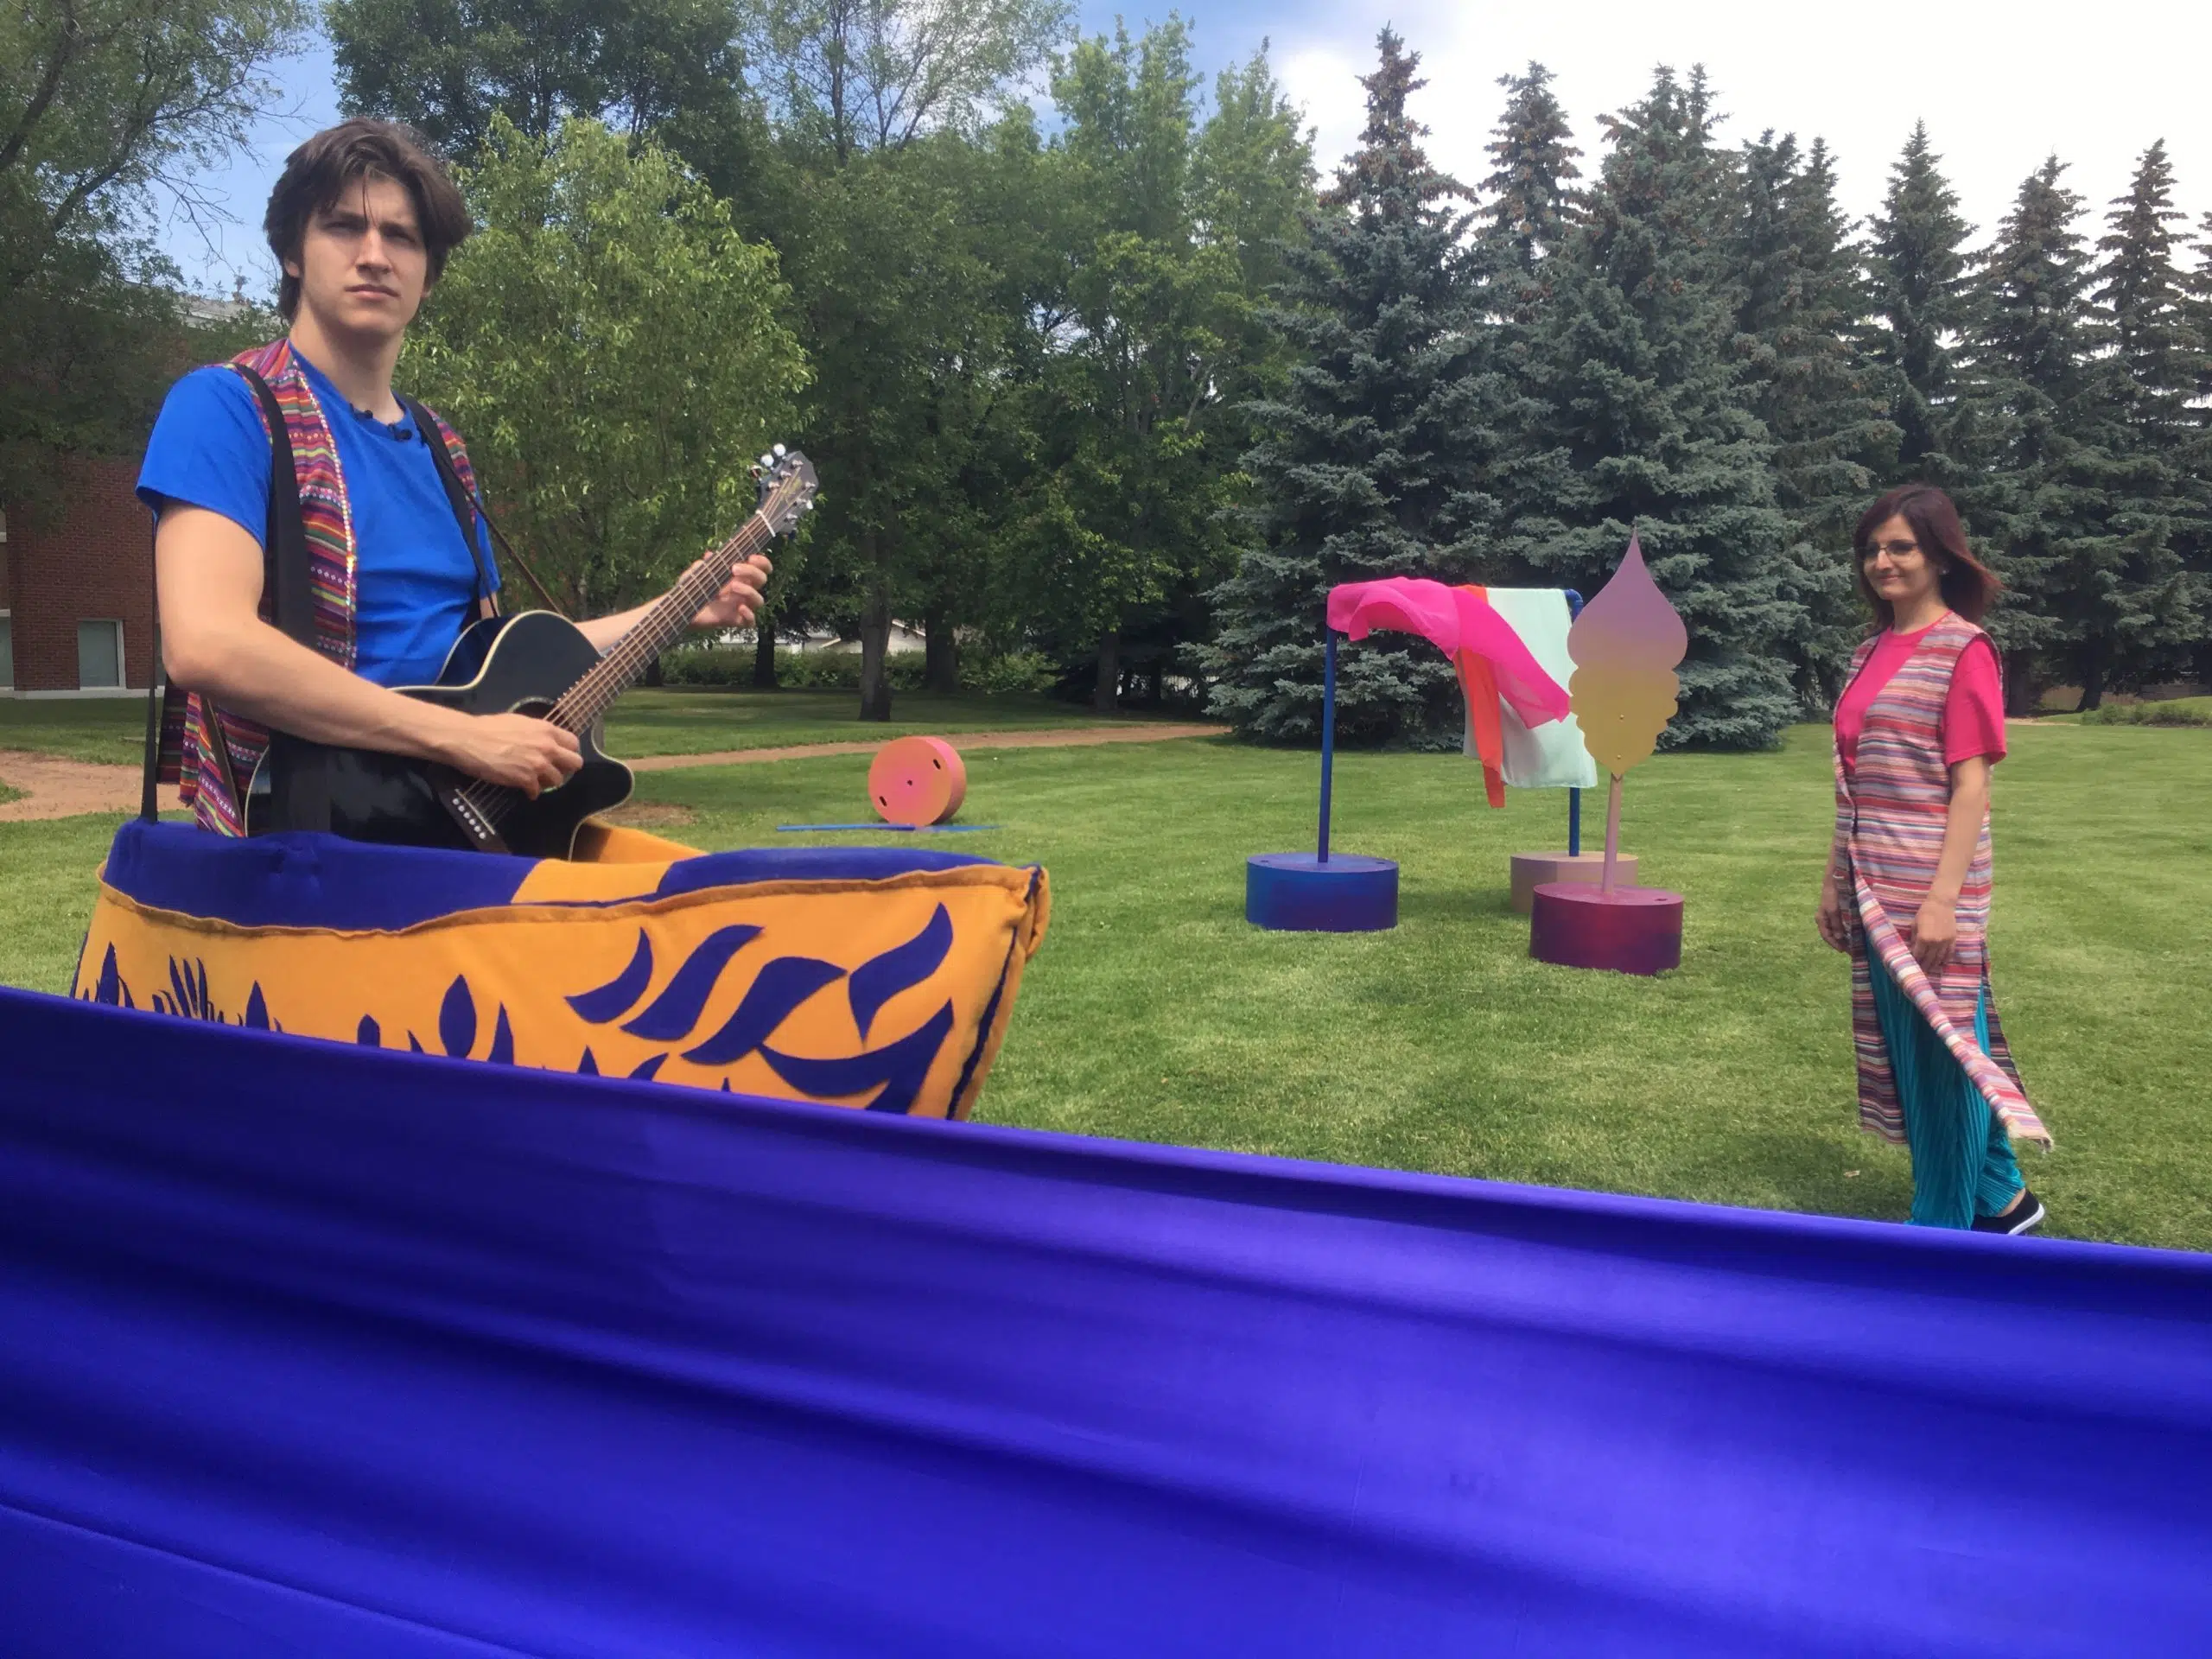 Syrian folktale comes to Saskatoon’s Theatre in the Park